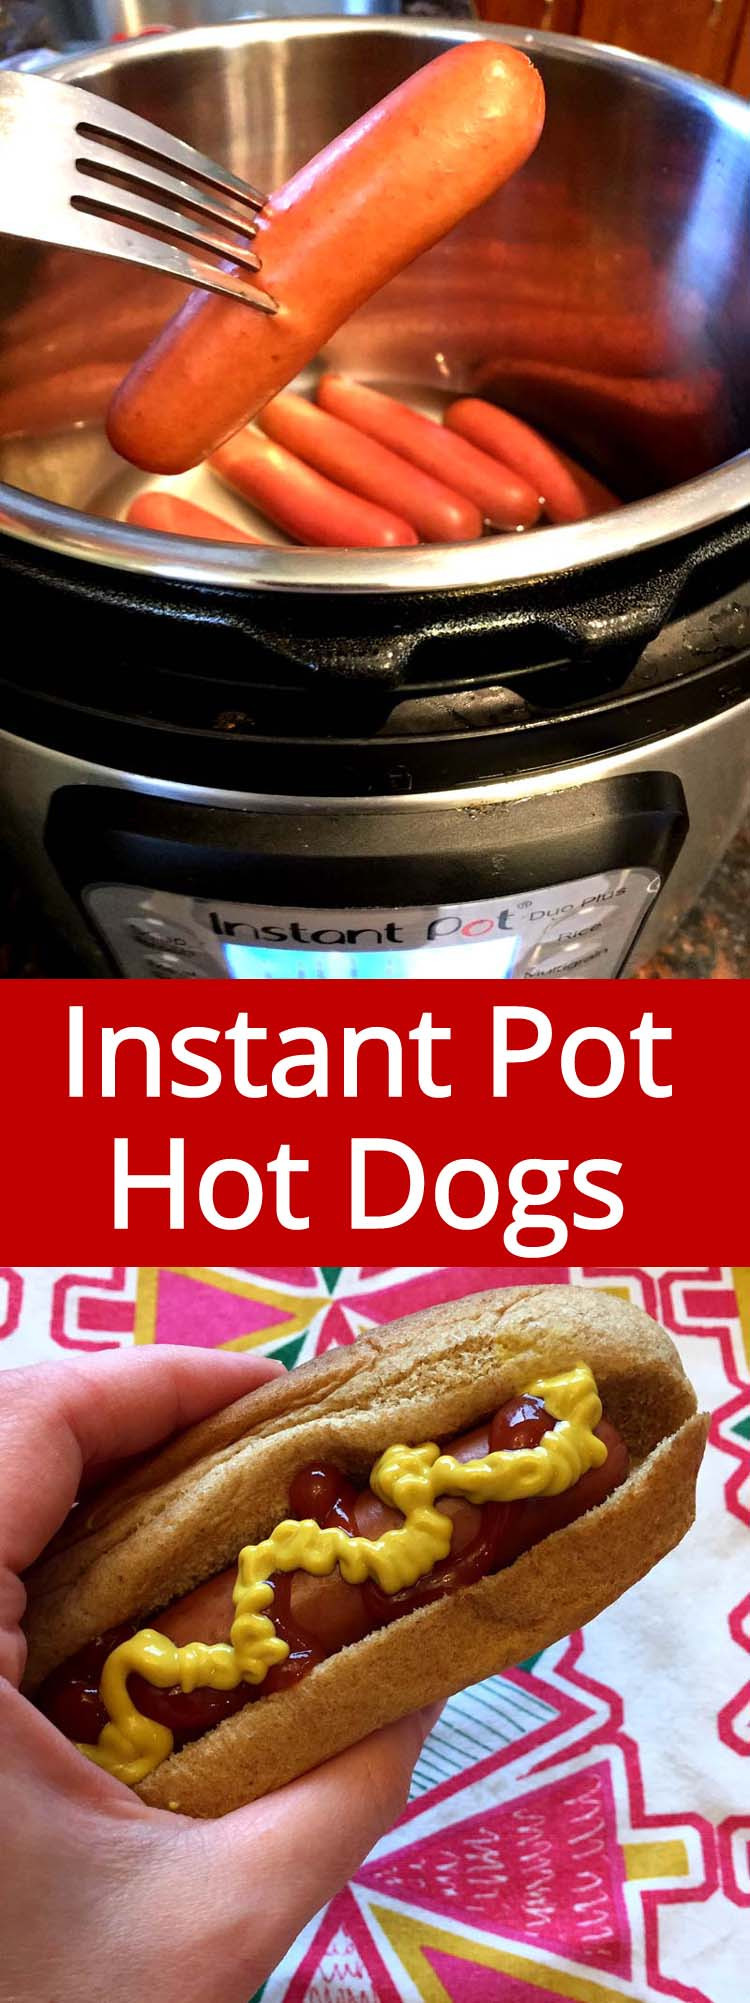 Pressure Cooker Hot Dogs
 The Best Ideas for Pressure Cooker Hot Dogs Best Round